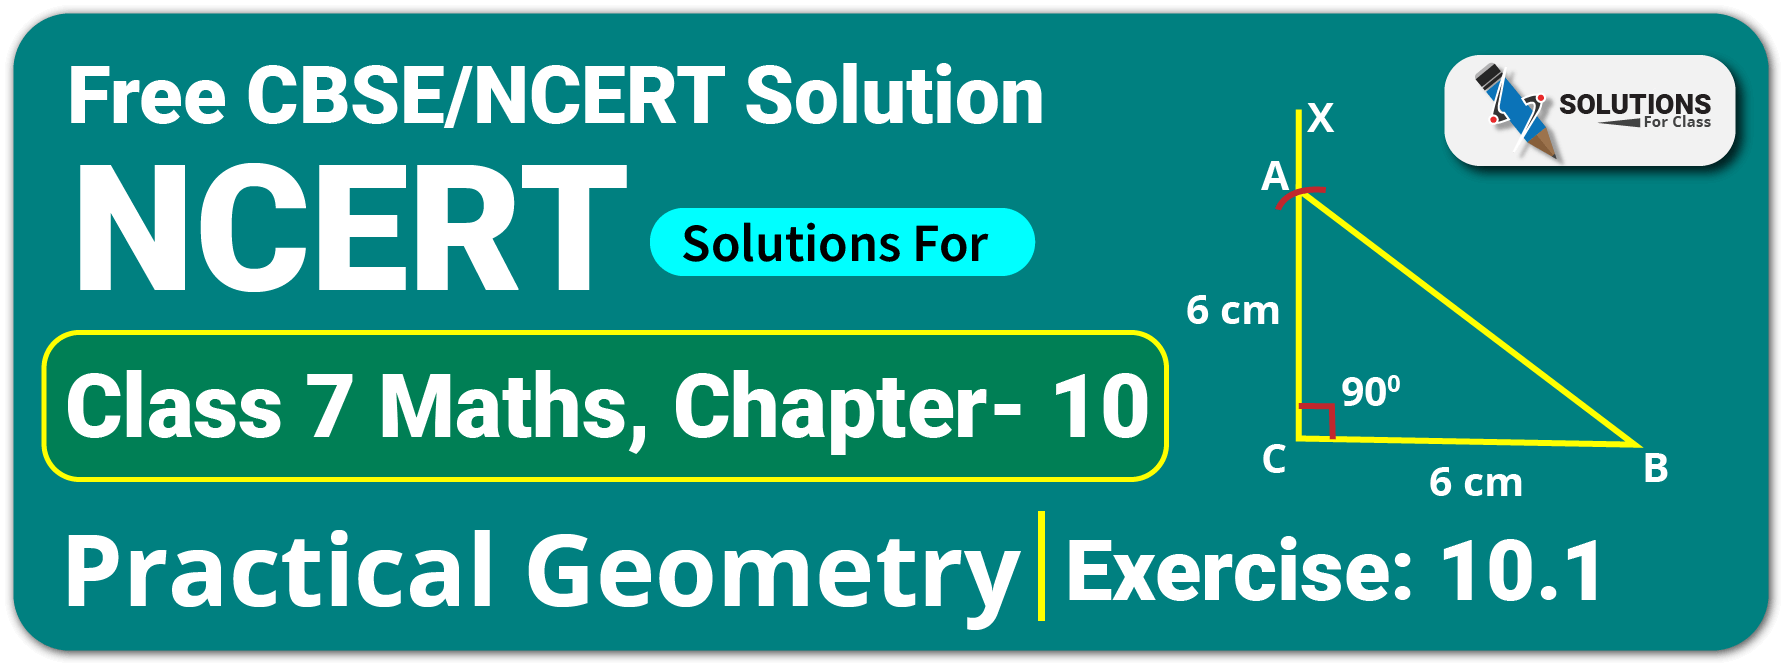 NCERT Solutions For Class 7 Maths Chapter 10 Practical Geometry Exercise 10.1